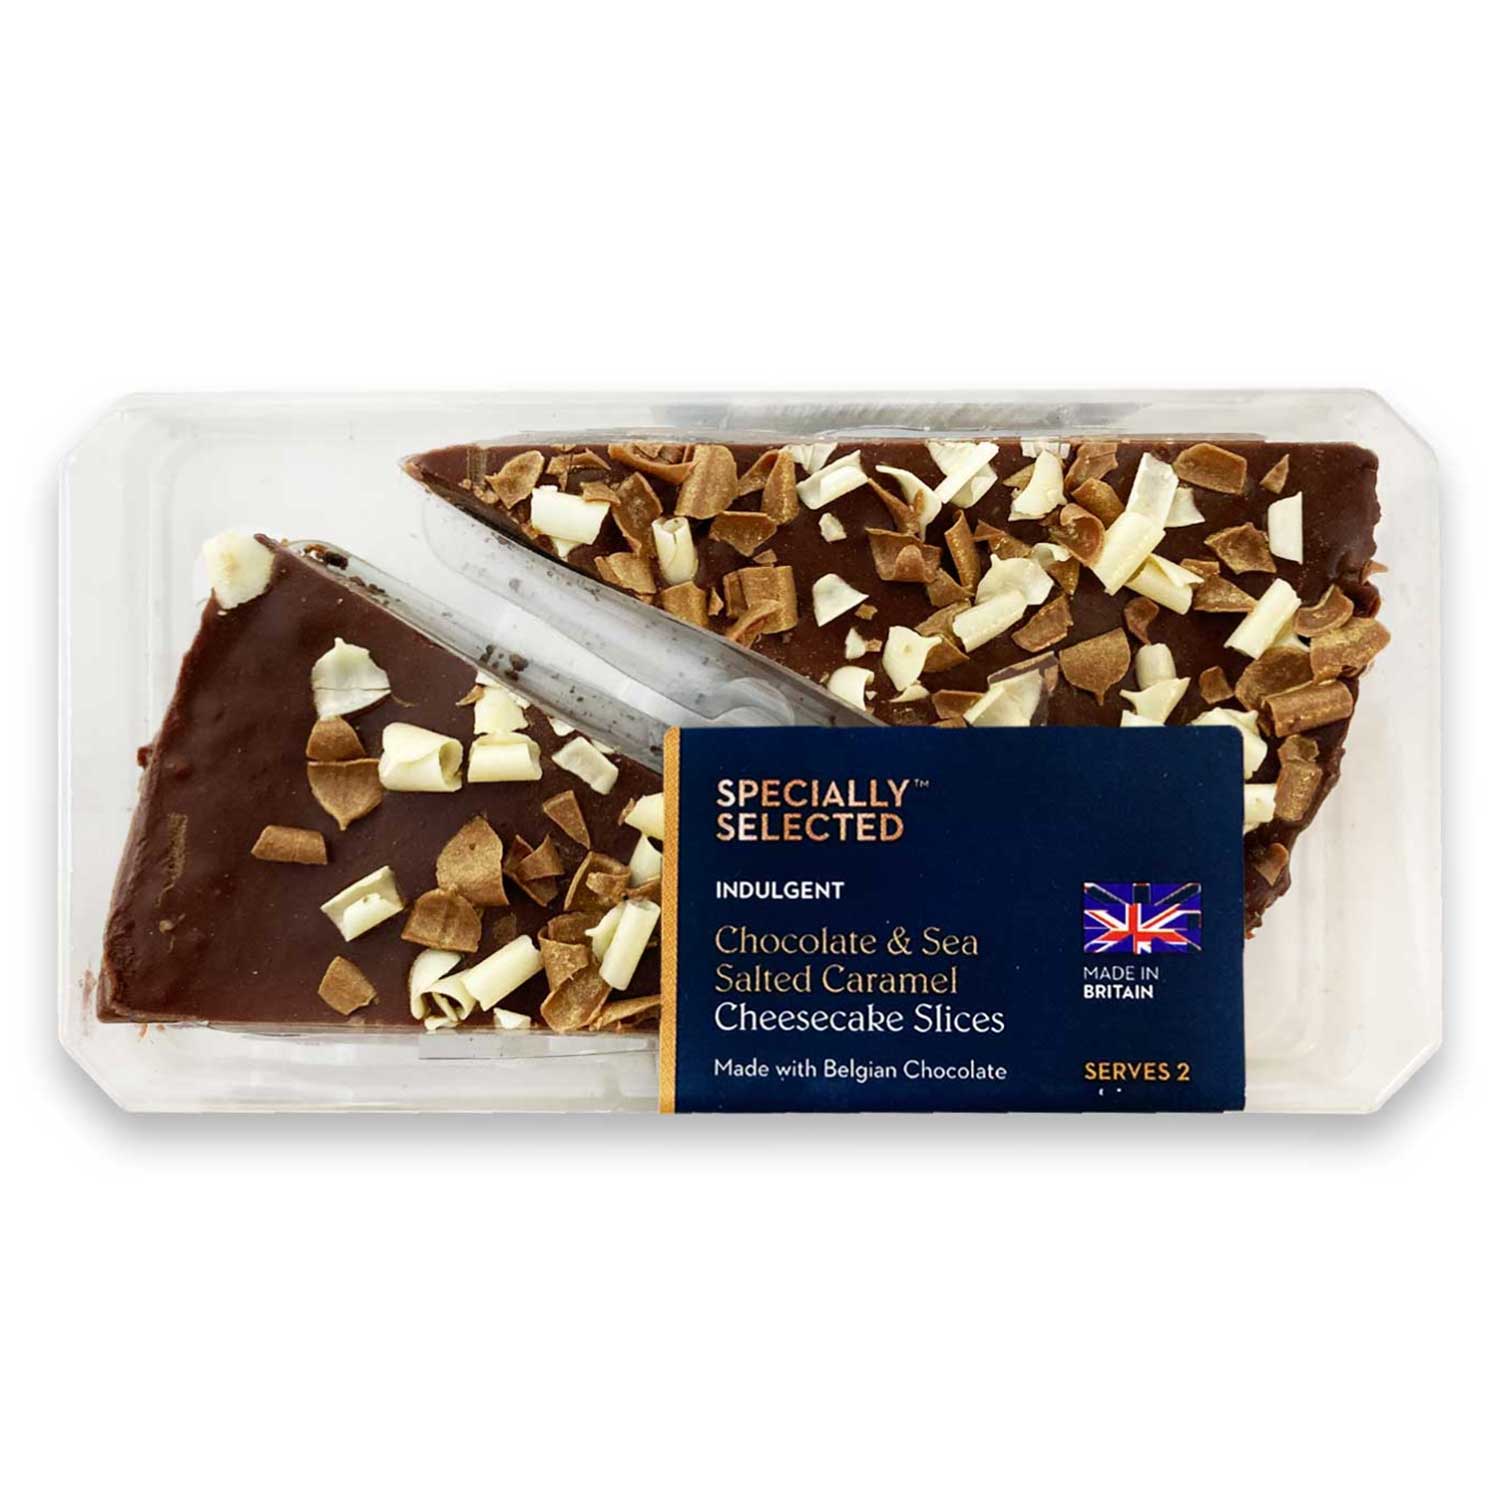 Specially Selected Indulgent Chocolate & Sea Salted Caramel ...